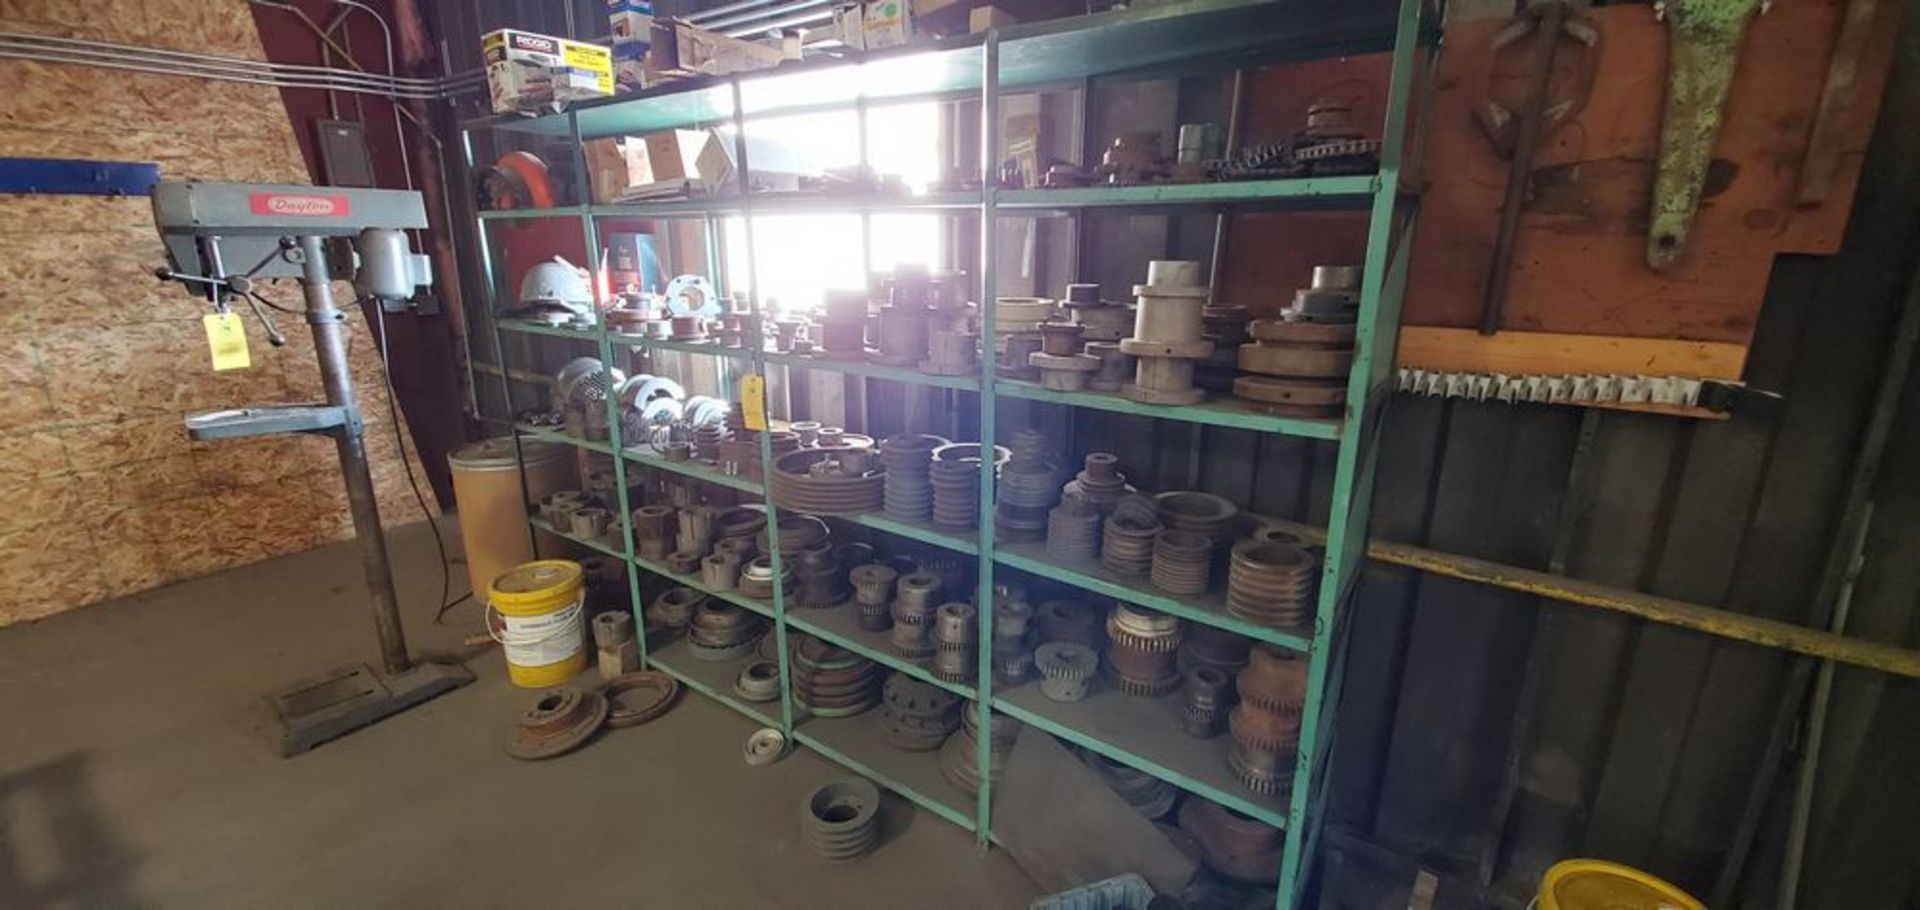 Located in Canon City, CO -- Racking with approximately 300 Drive and coupling parts both new and